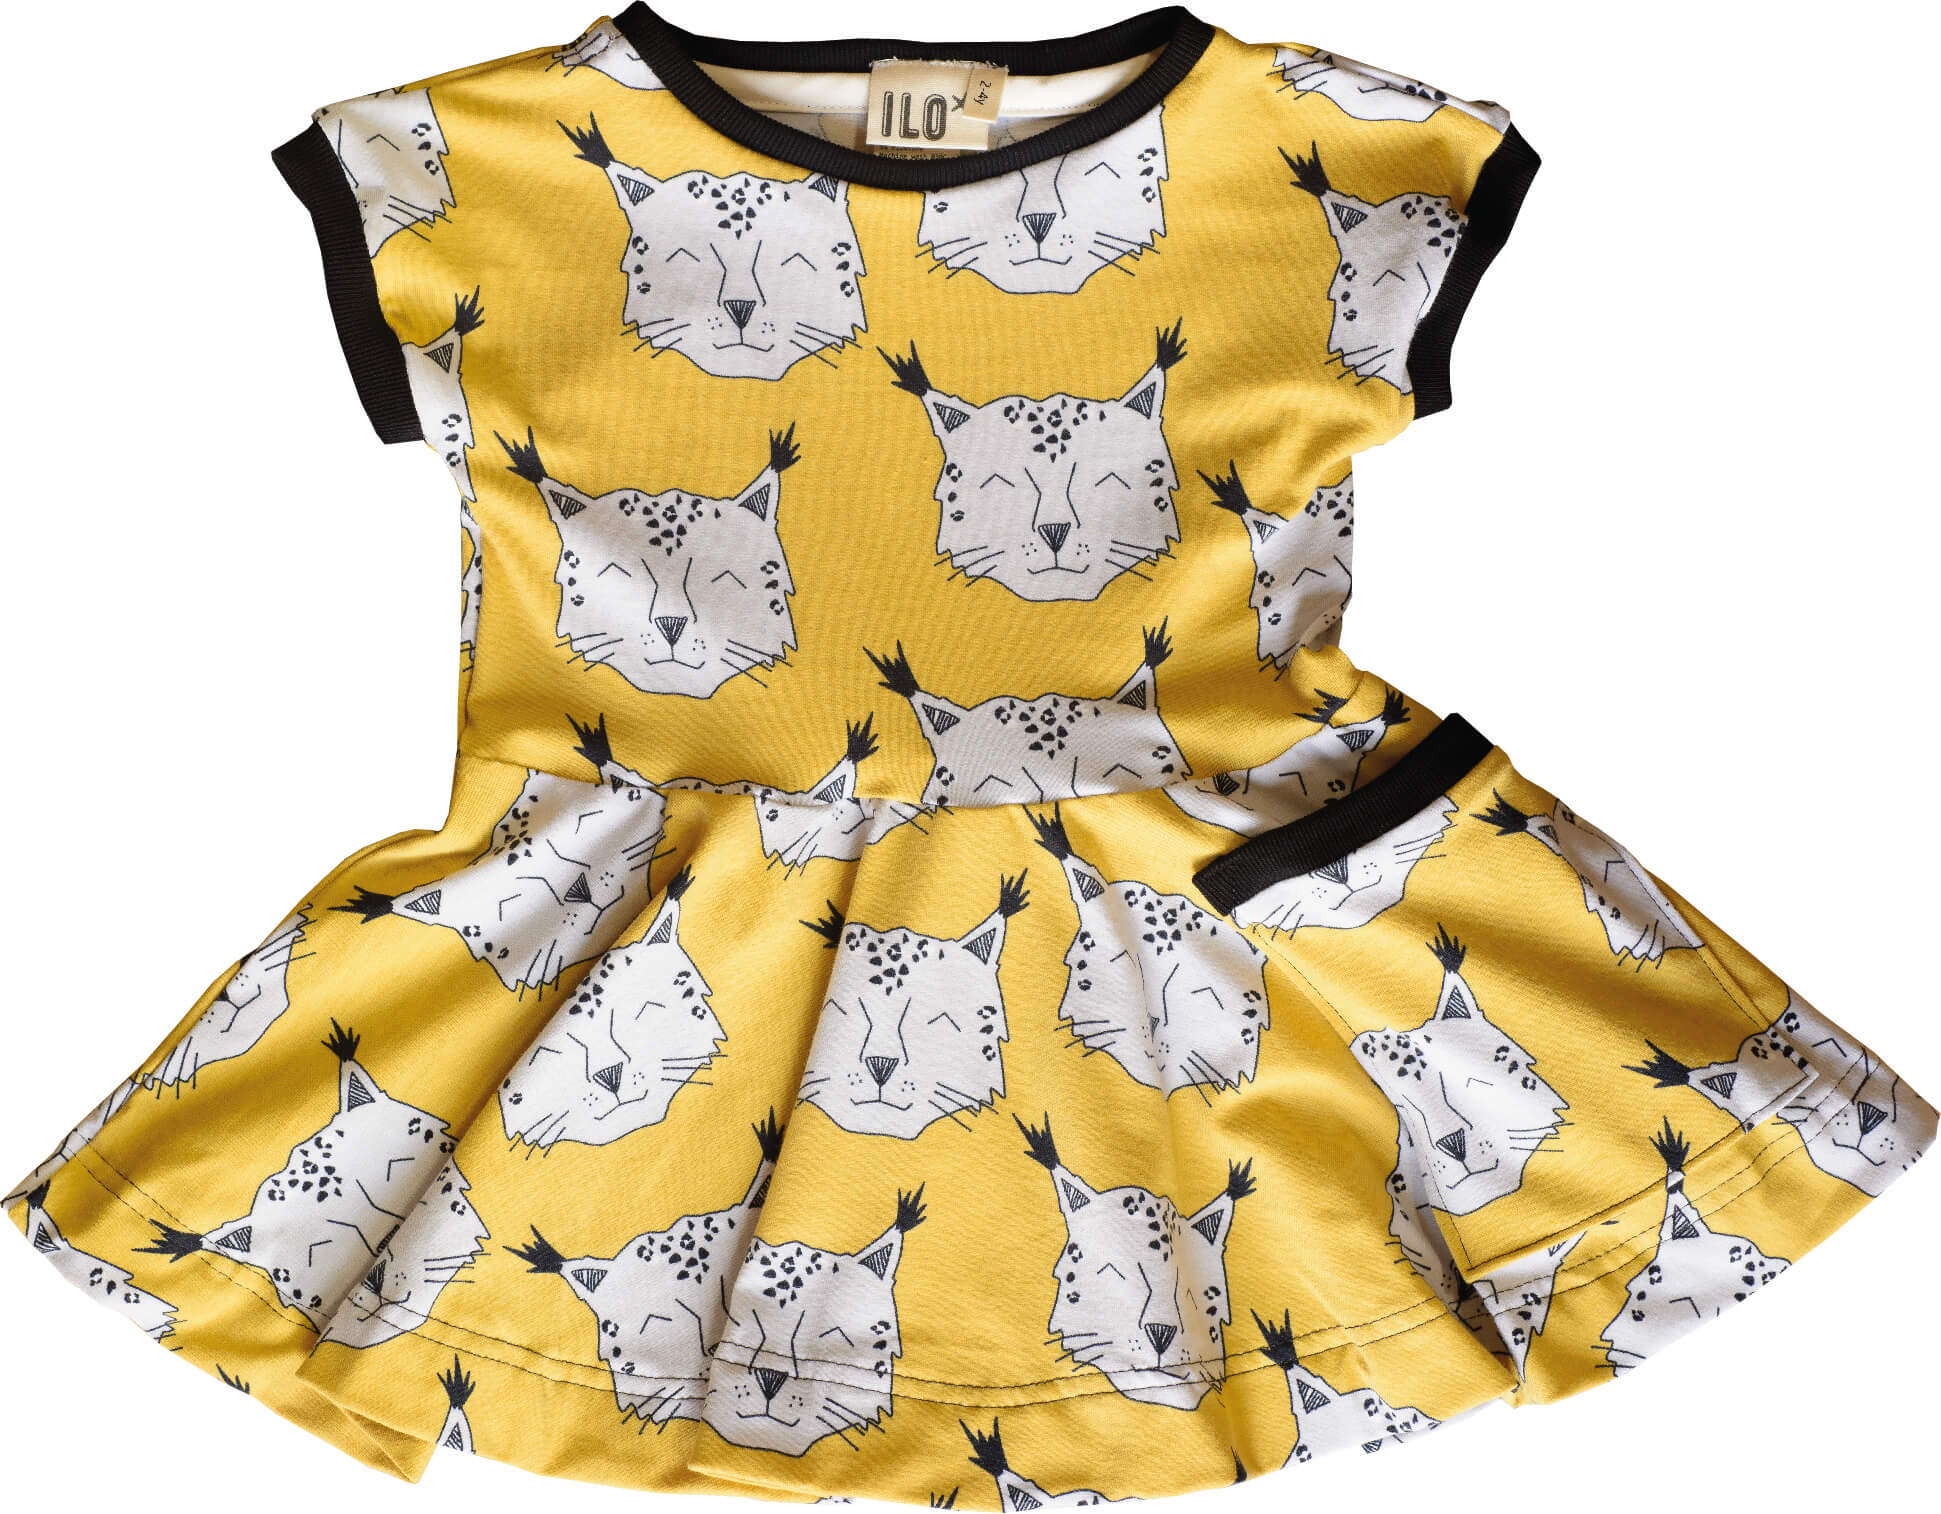 dress for baby and children in yellow with snow leopard faces in white with black ribbing. Skater style means it has a flowy skirt and also 1 pocket.